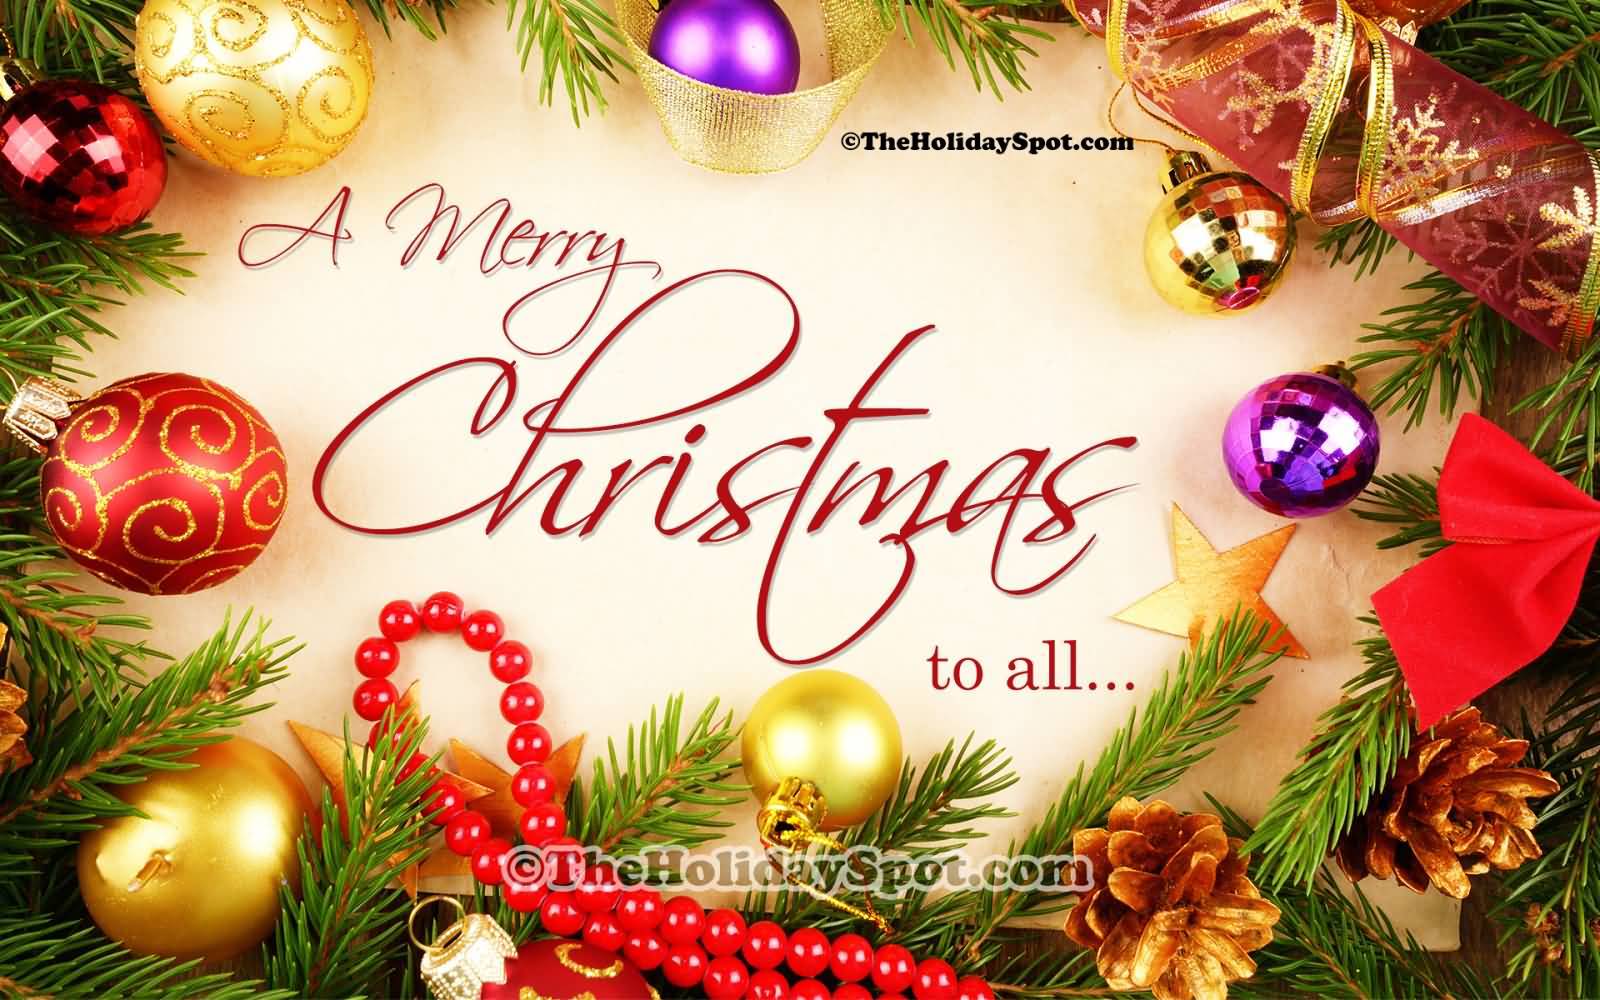 65 Most Beautiful Christmas Wish Pictures